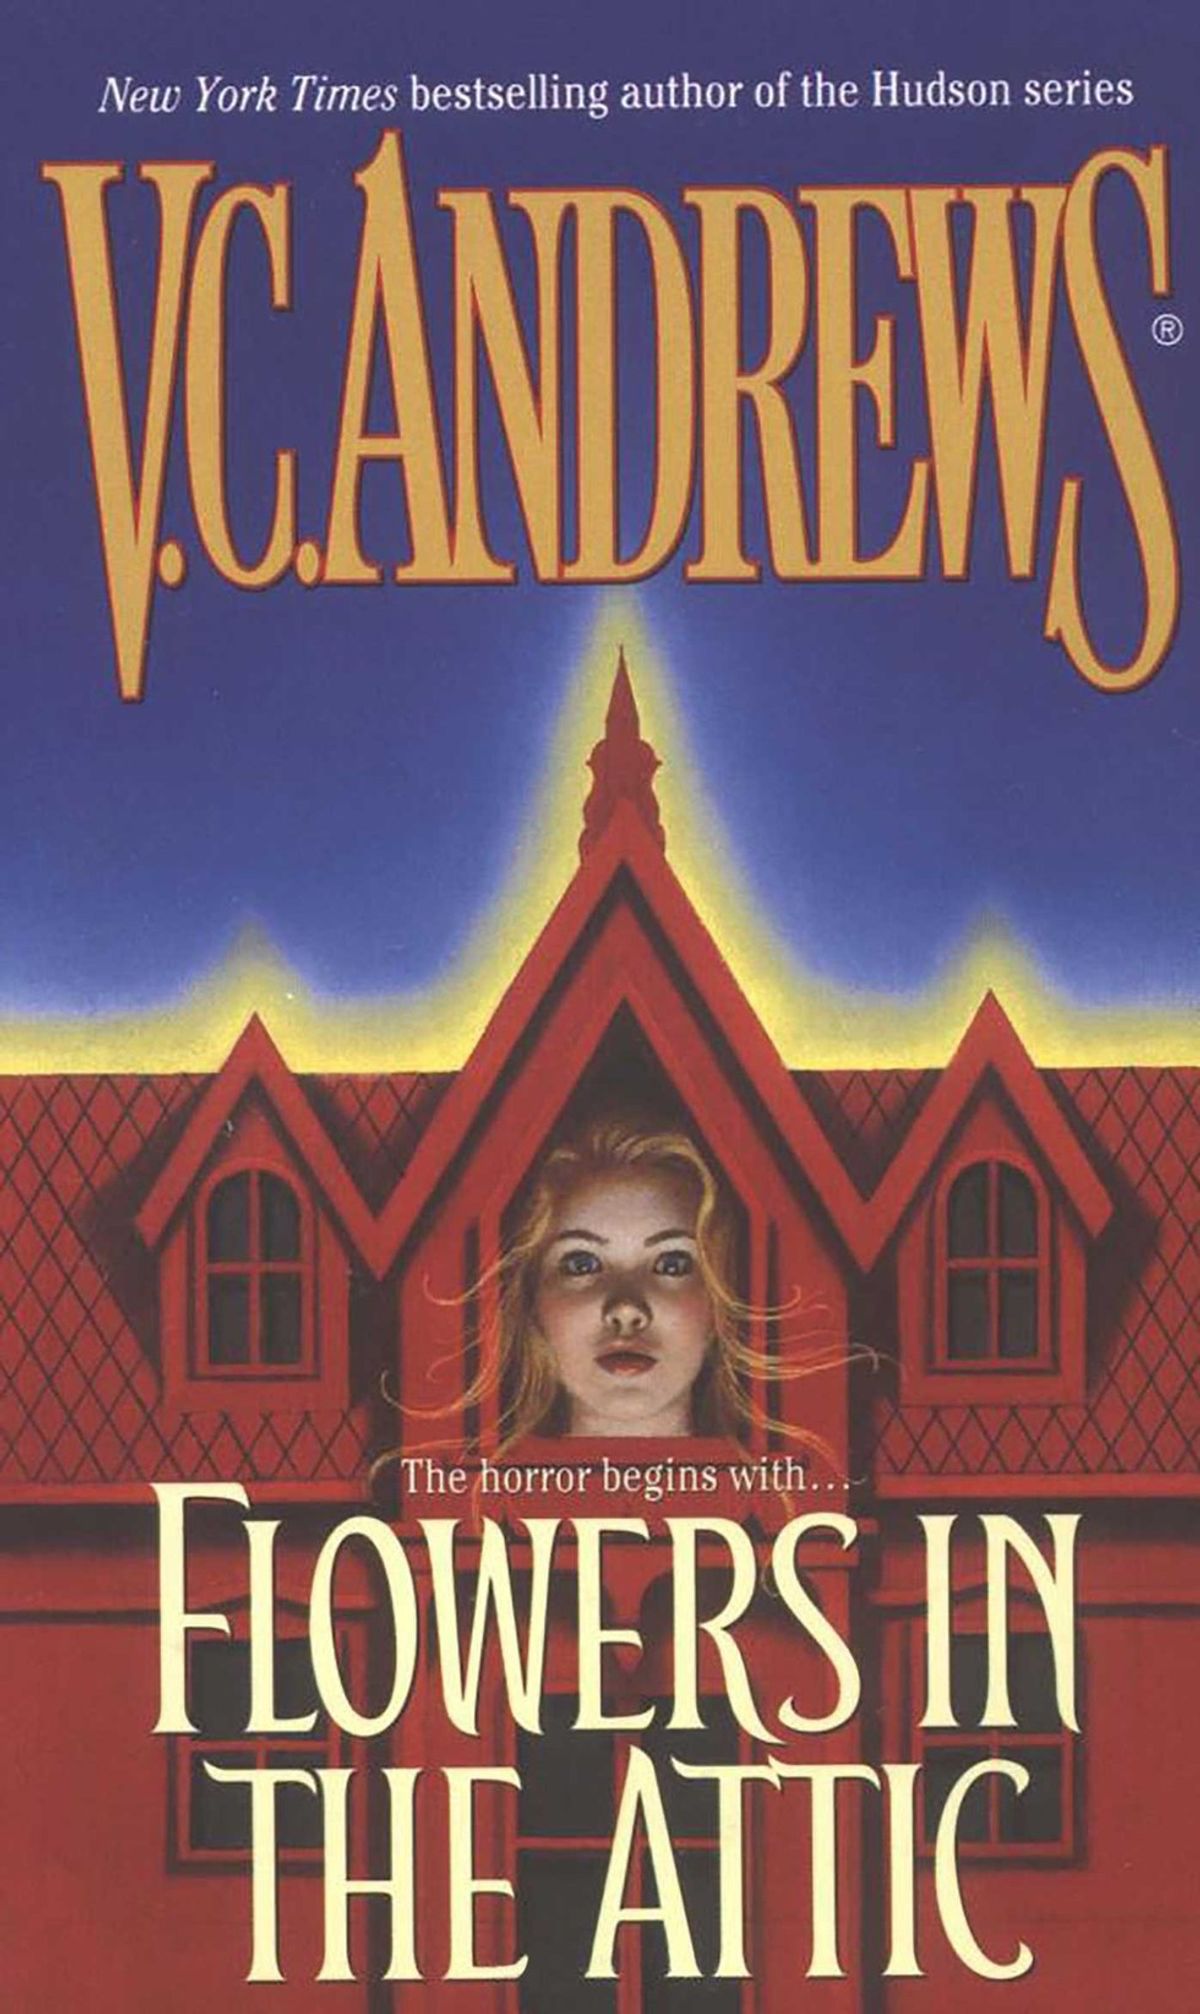 5 Facts About V.C. Andrews You Probably Didn't Know